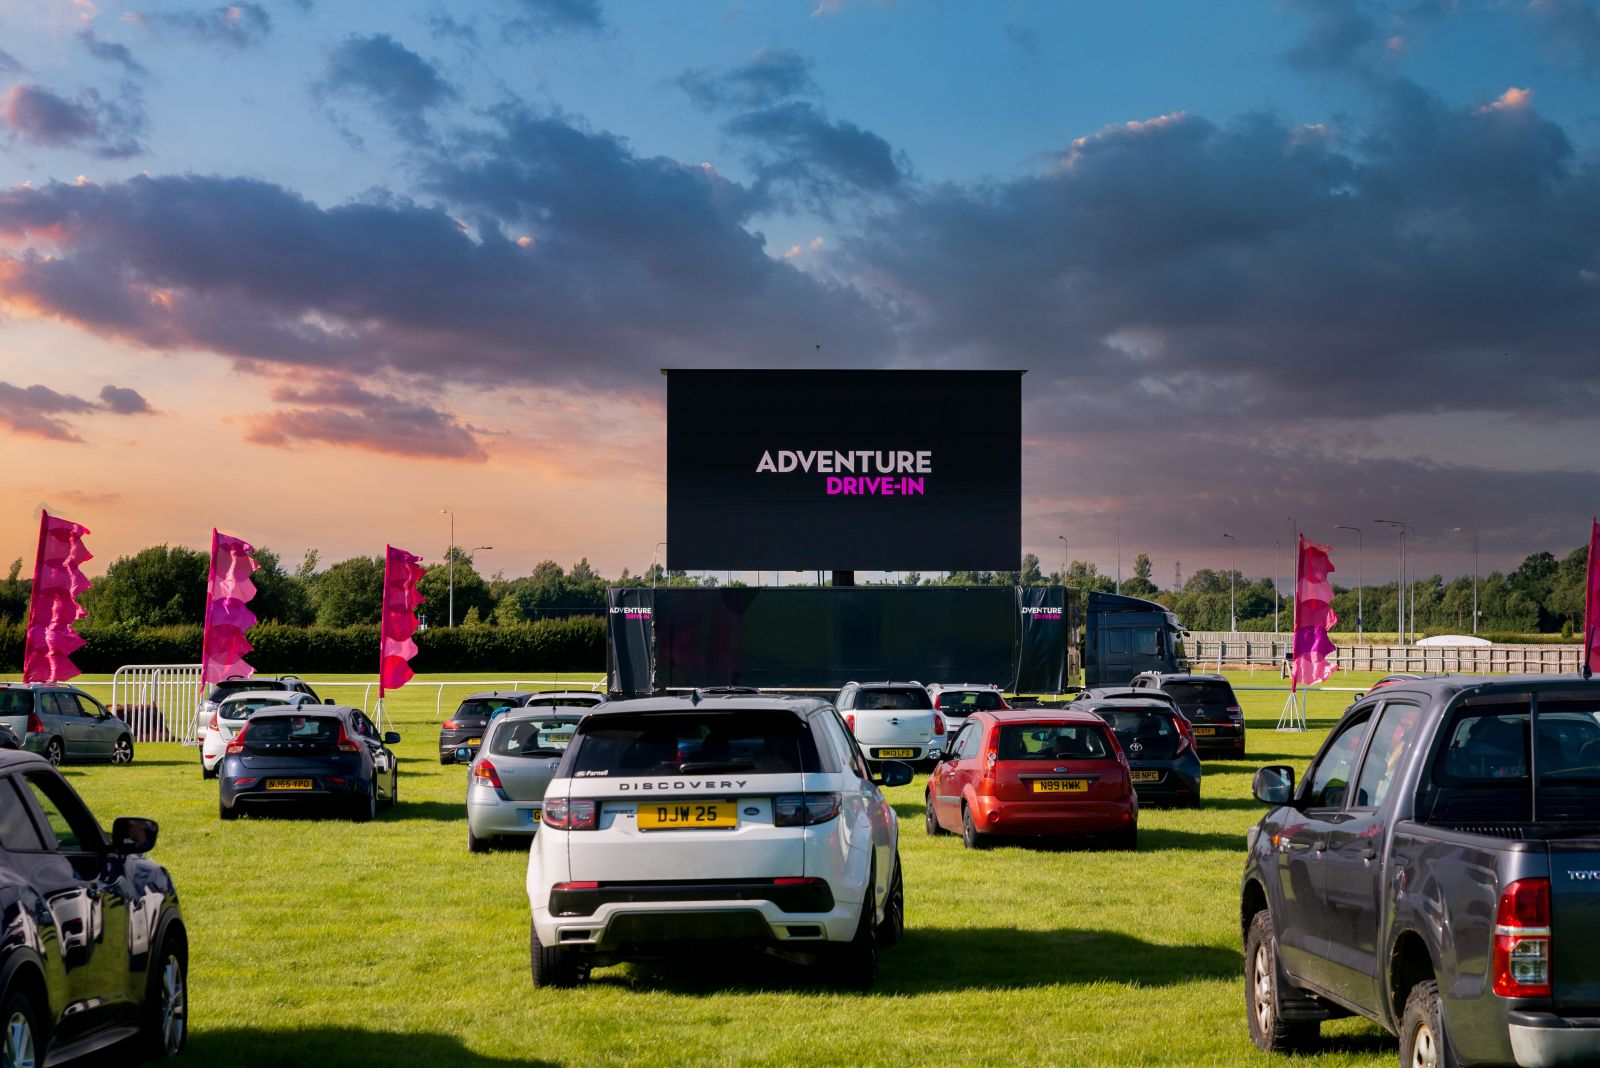 Adventure Drive-In is coming to Bristol